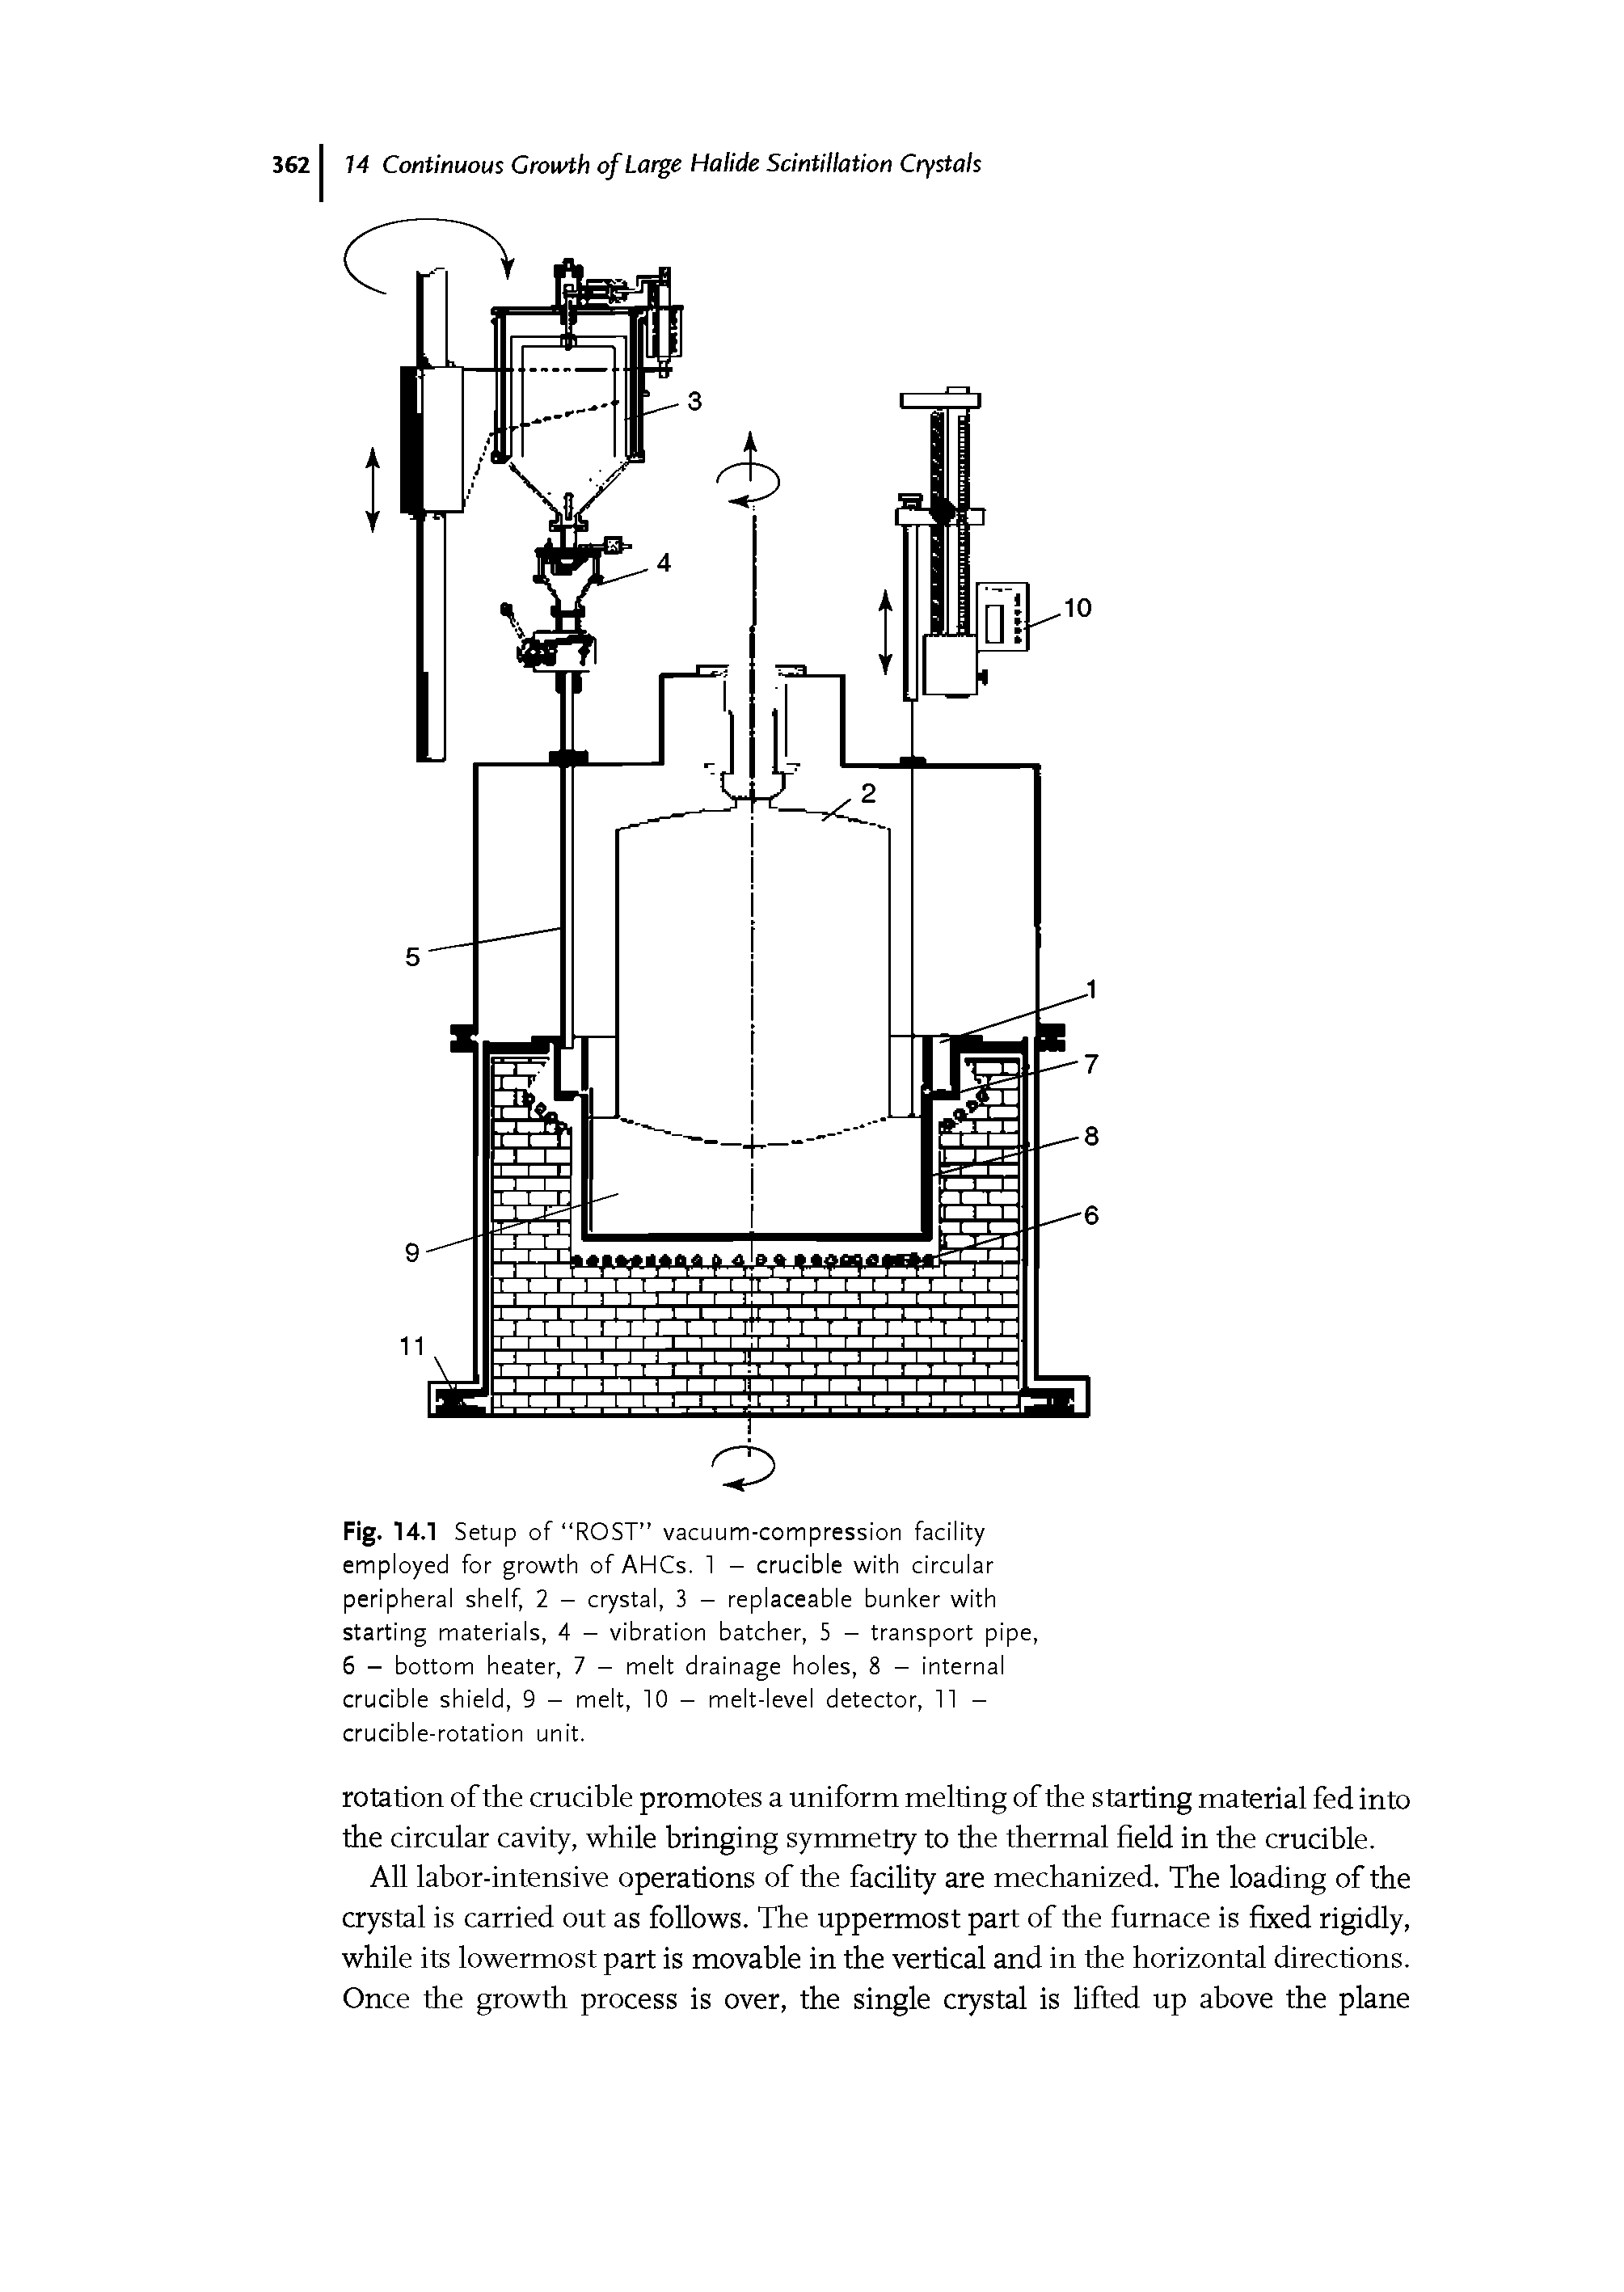 Fig. 14.1 Setup of ROST vacuum-compression facility employed for growth of AHCs. 1 - crucible with circular peripheral shelf, 2 - crystal, 3 - replaceable bunker with starting materials, 4 - vibration batcher, 5 - transport pipe, 6 - bottom heater, 7 - melt drainage holes, 8 - internal crucible shield, 9 - melt, 10 - melt-level detector, 11 -crucible-rotation unit.